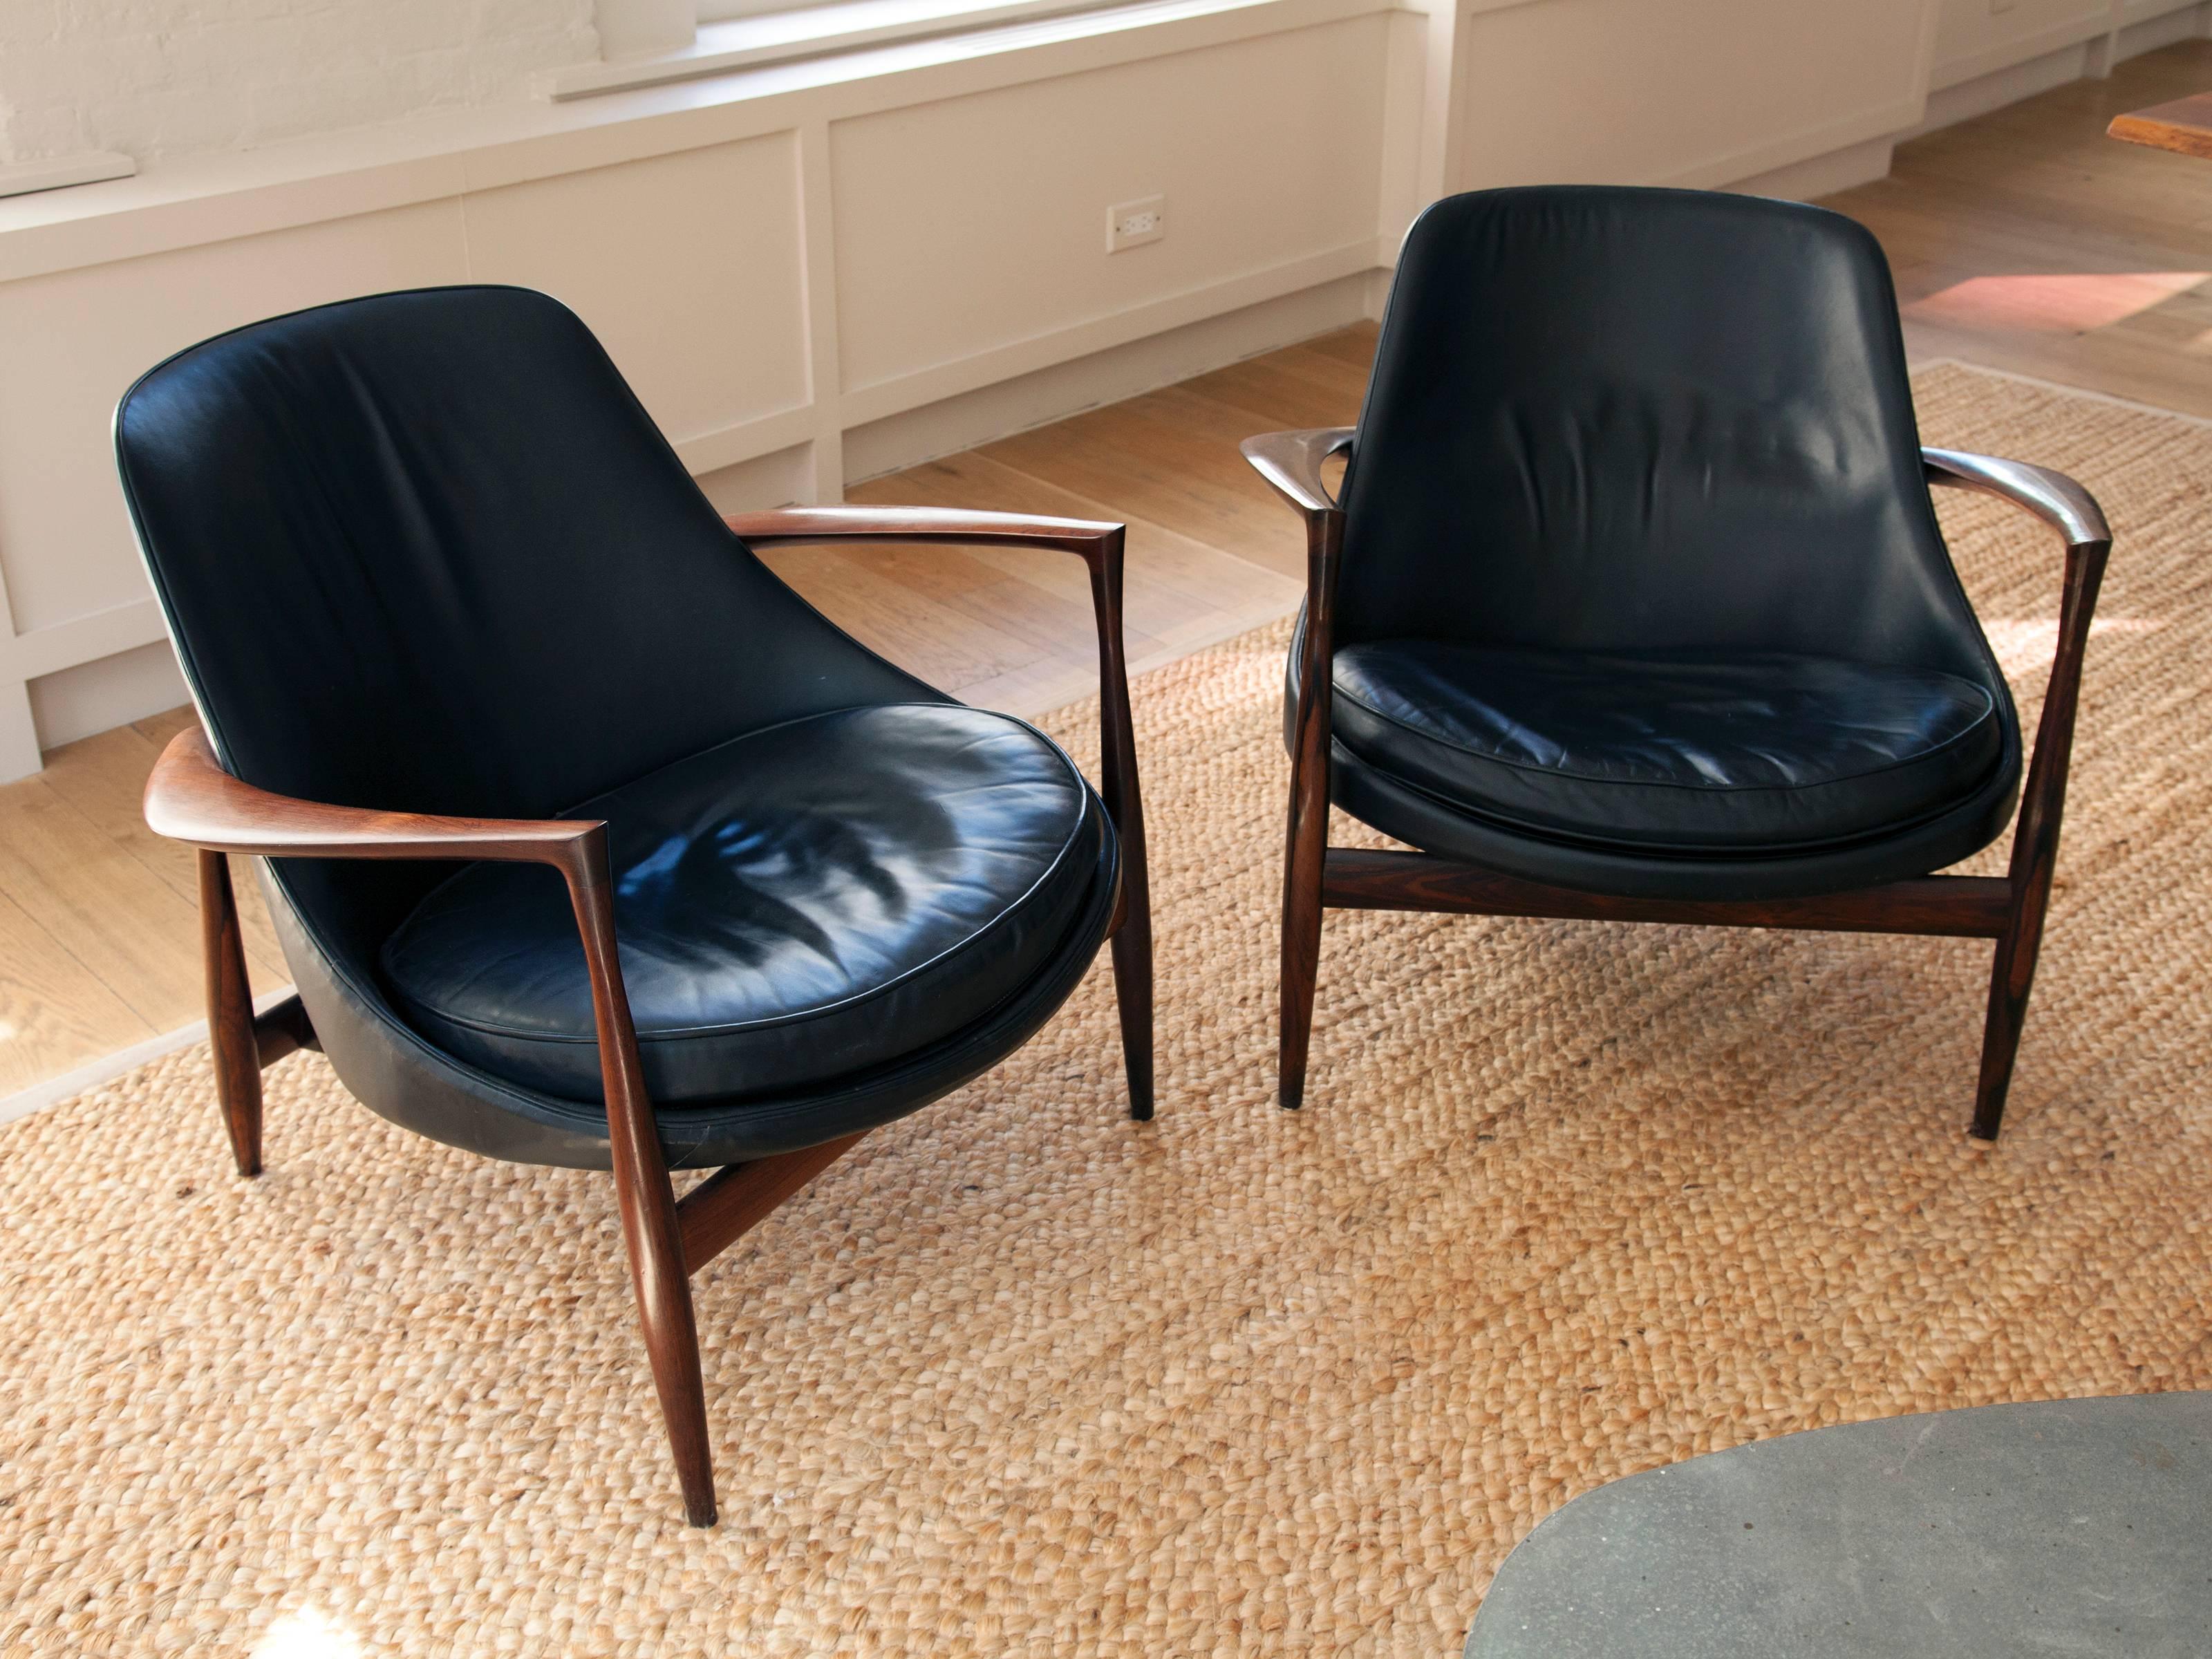 Exceptional pair of rosewood Elizabeth chairs designed by Ib Kofod-Larsen in 1956, manufactured by Christensen & Larsen.